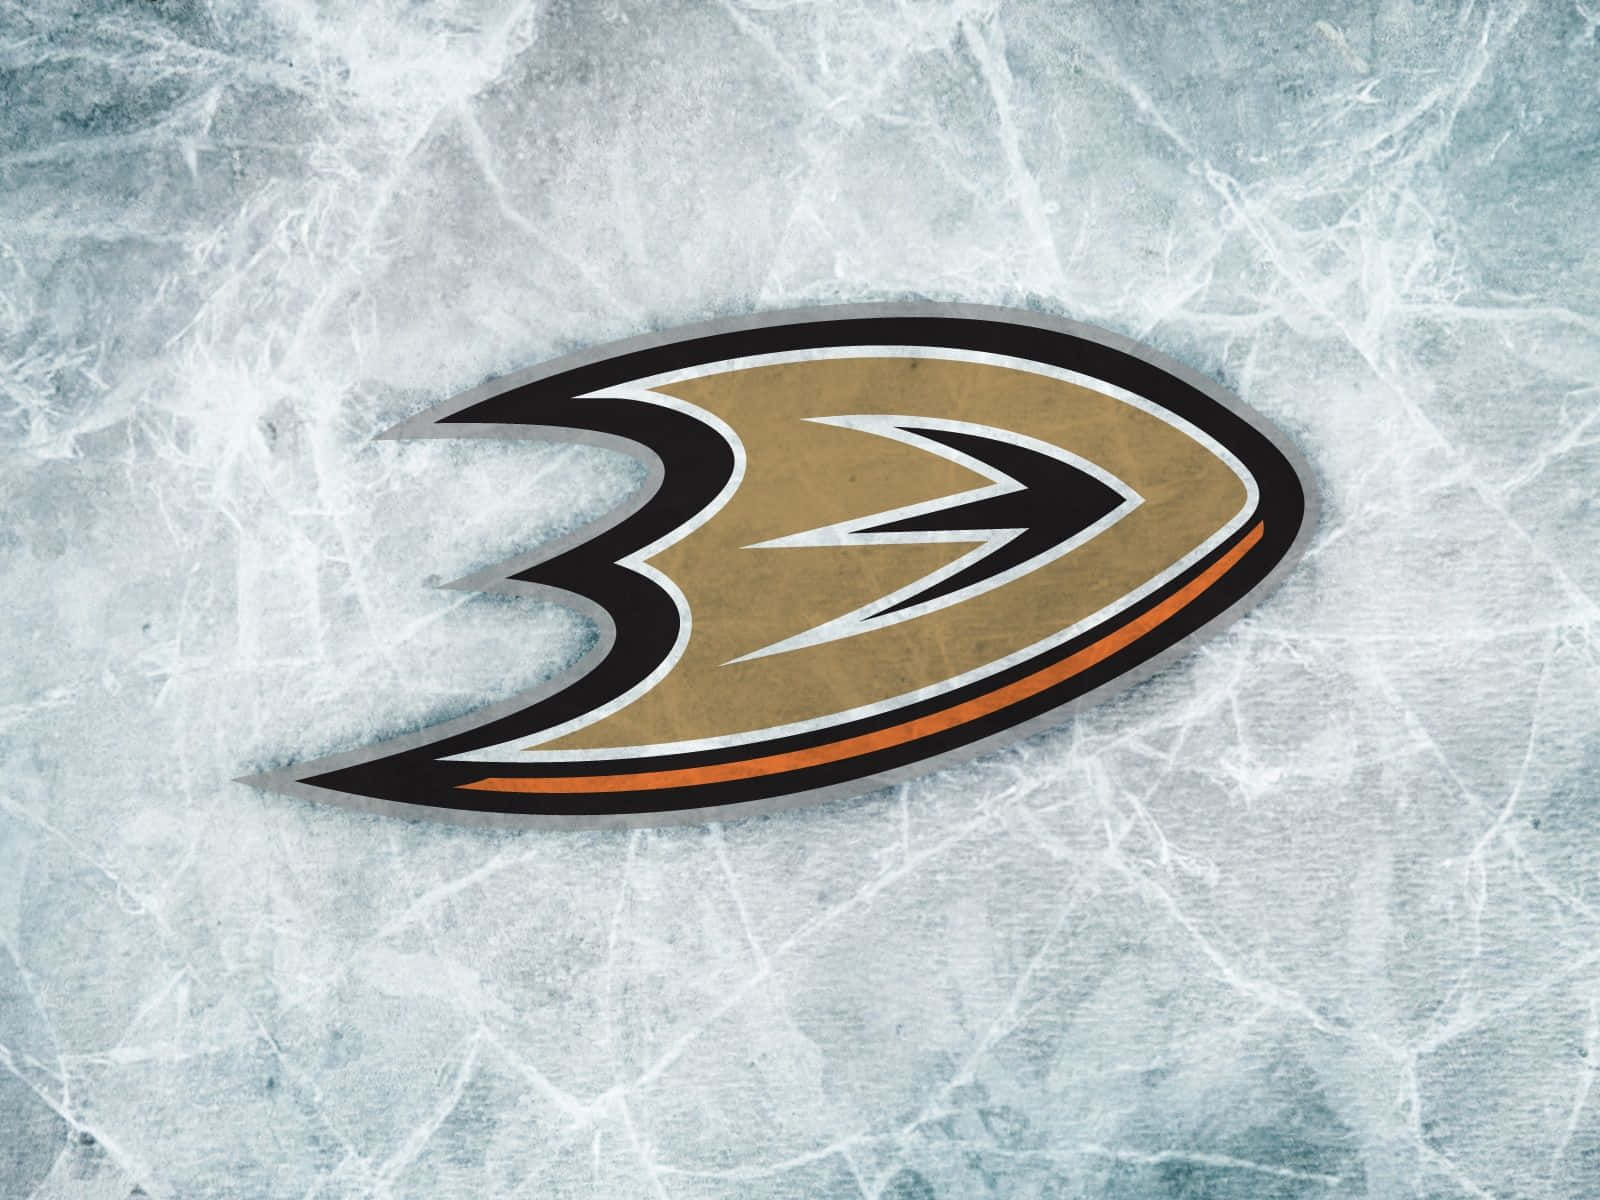 Anaheim Ducks Fly for Home victories